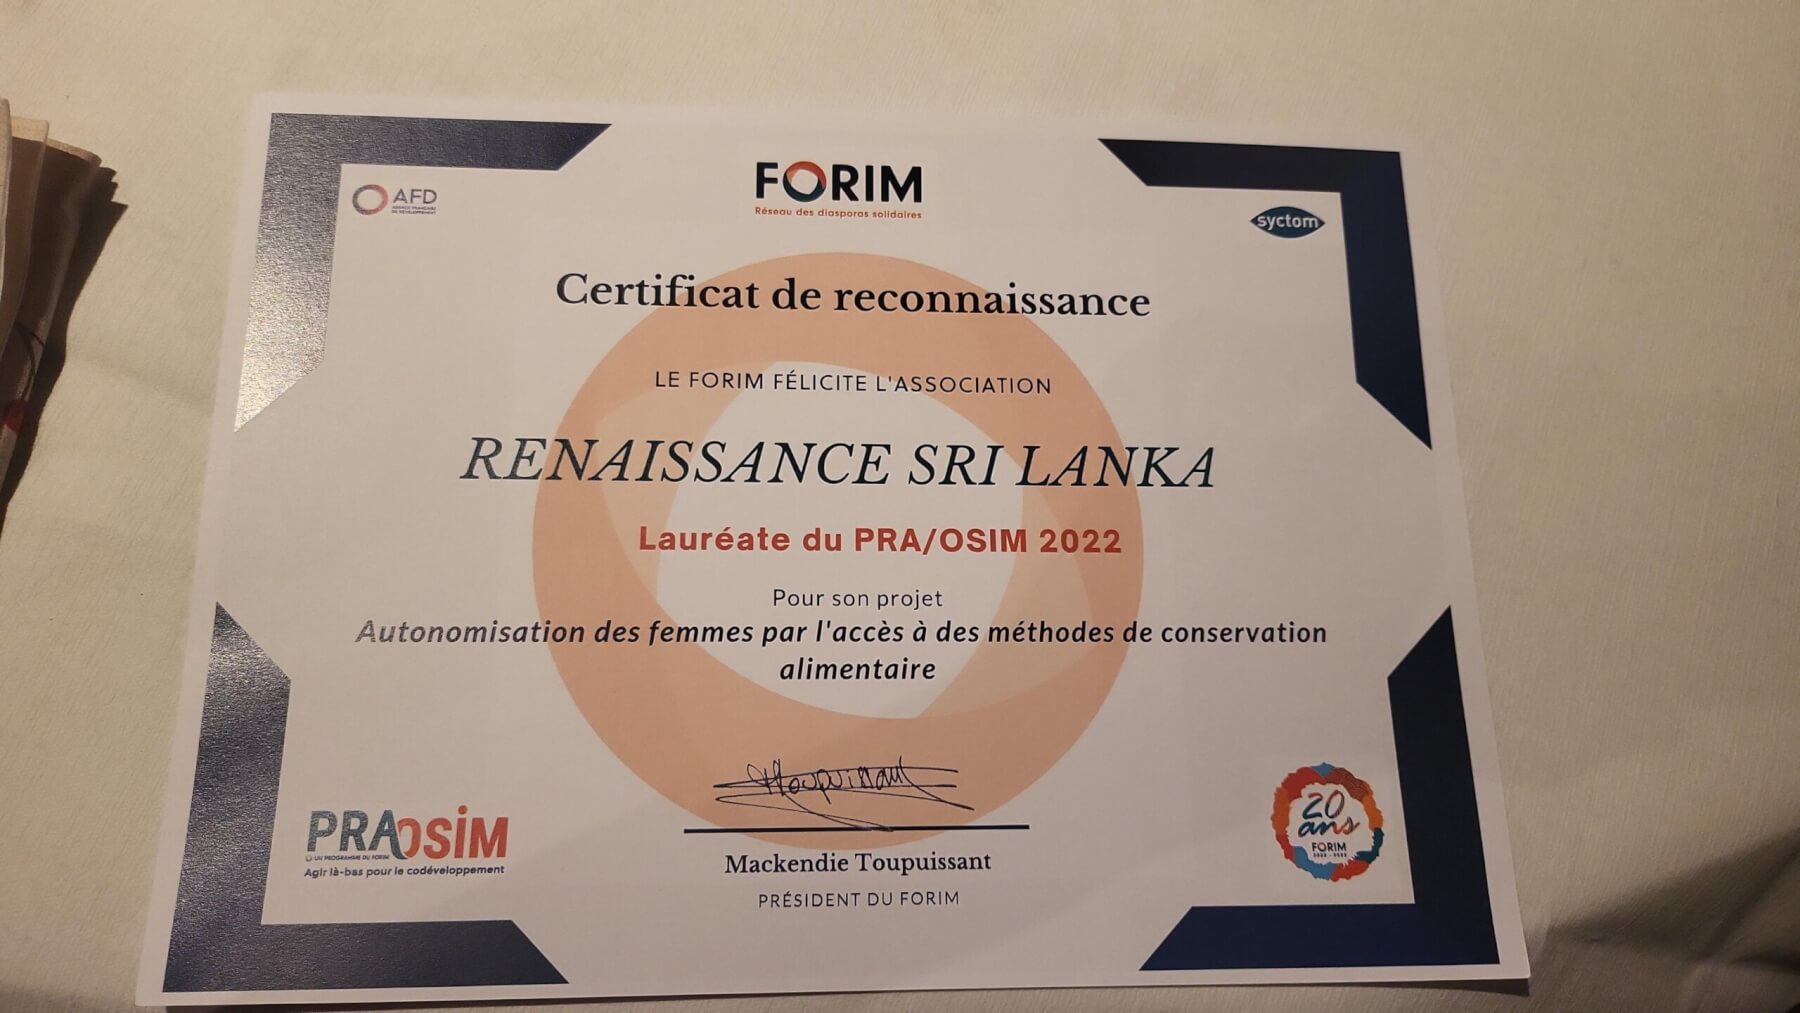 Certificate of Recognition awarded by FORIM to Renaissance Sri Lanka © Renaissance Sri Lanka